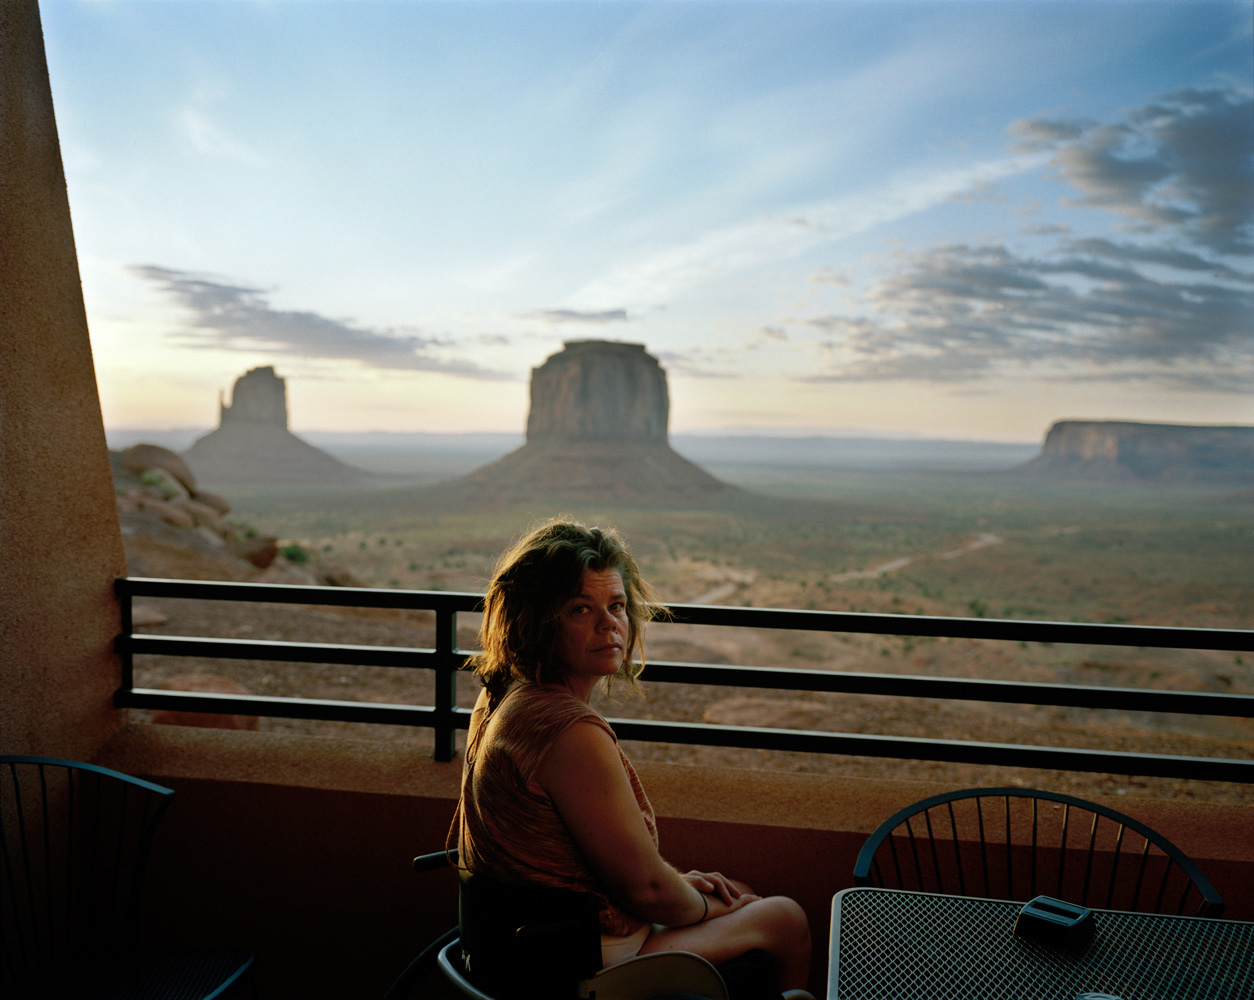 Nicole, Monument Valley, Utah, 2009 
                               I made this picture while on a road trip through the American West. Nicole and I had awoken at 5 a.m. to watch the sunrise over  The Mittens  and the photograph was made as an intuitive response to the light as it slowly emerged into the morning. It wasn’t until later, after the film was processed and I was going through the proofs, that I was able to see the potential in the photograph. The image evokes a sense of loss, both psychologically and metaphorically. Here, the majesty of the iconic American landscape is beyond reach — separated from us by a barrier — and only available as a distant view to look upon. The subject confronts us with this realization with her direct gaze. A sense of disconnection with the landscape is something not unfamiliar to Australians. White Australians live with the knowledge that we reside here in our country having dispossessed indigenous Australians from the land, and the process of reconciliation remains ongoing and unresolved.